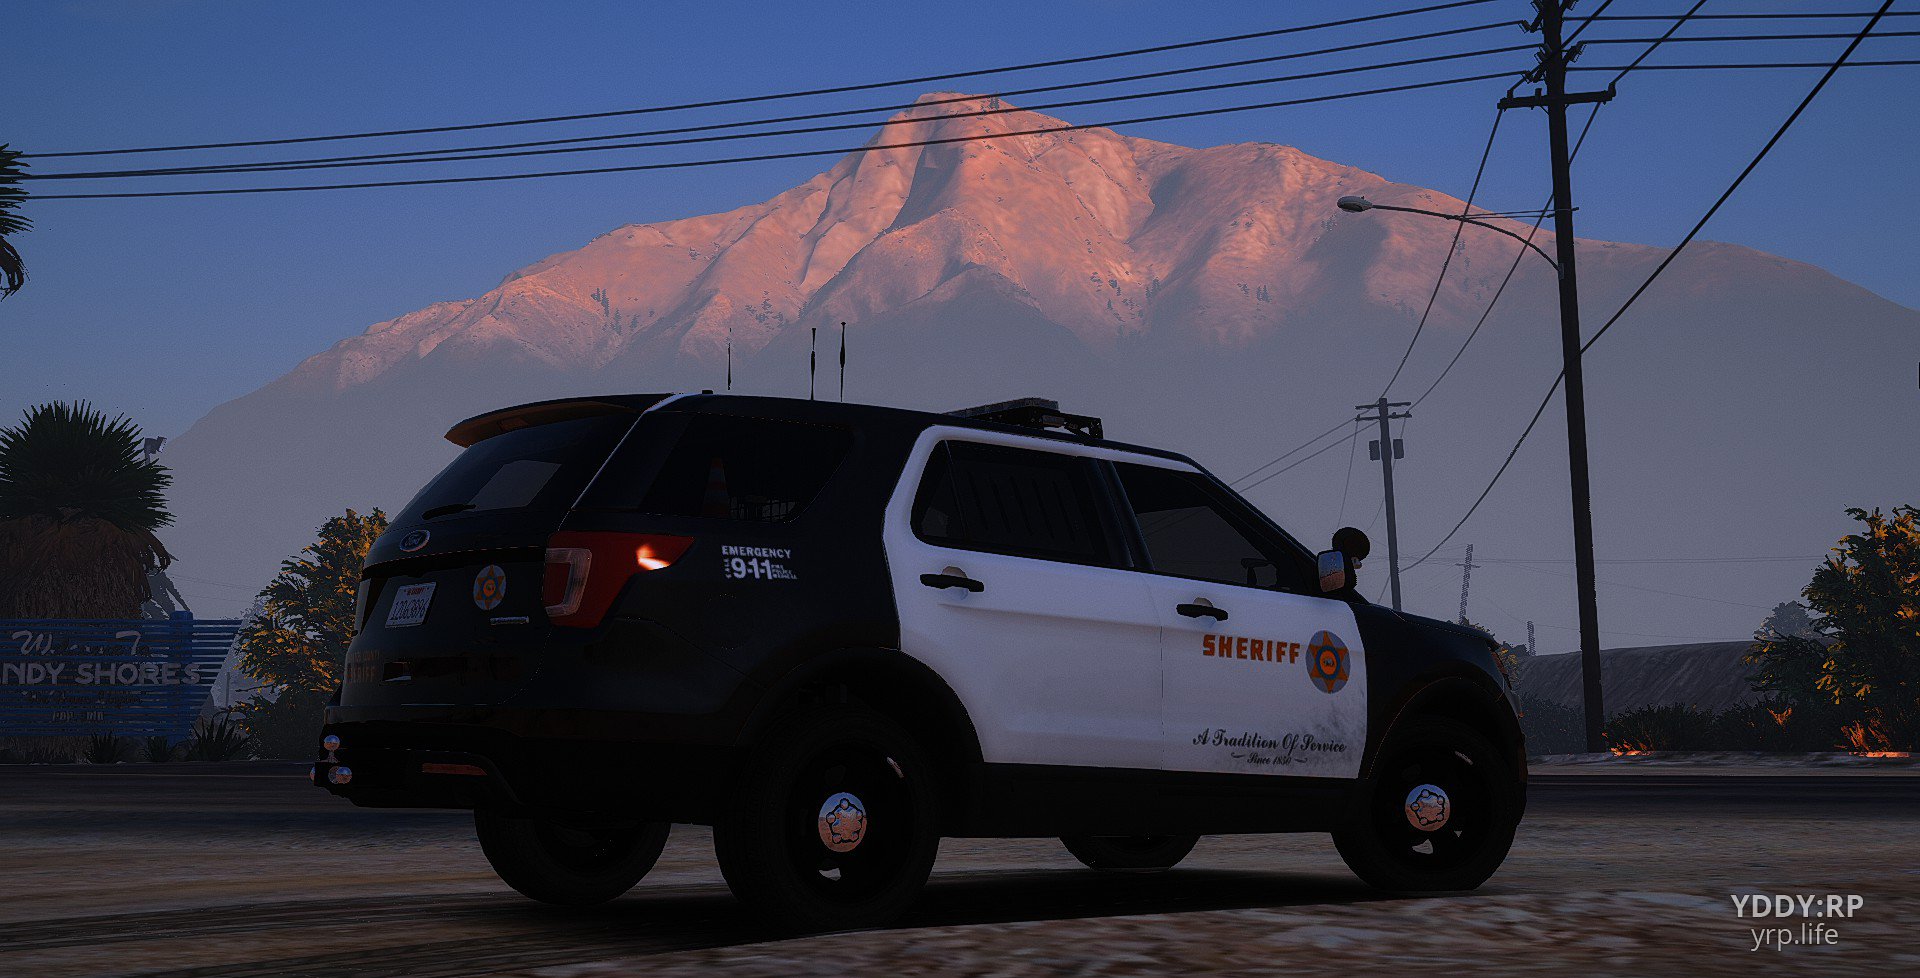 All about Blaine County